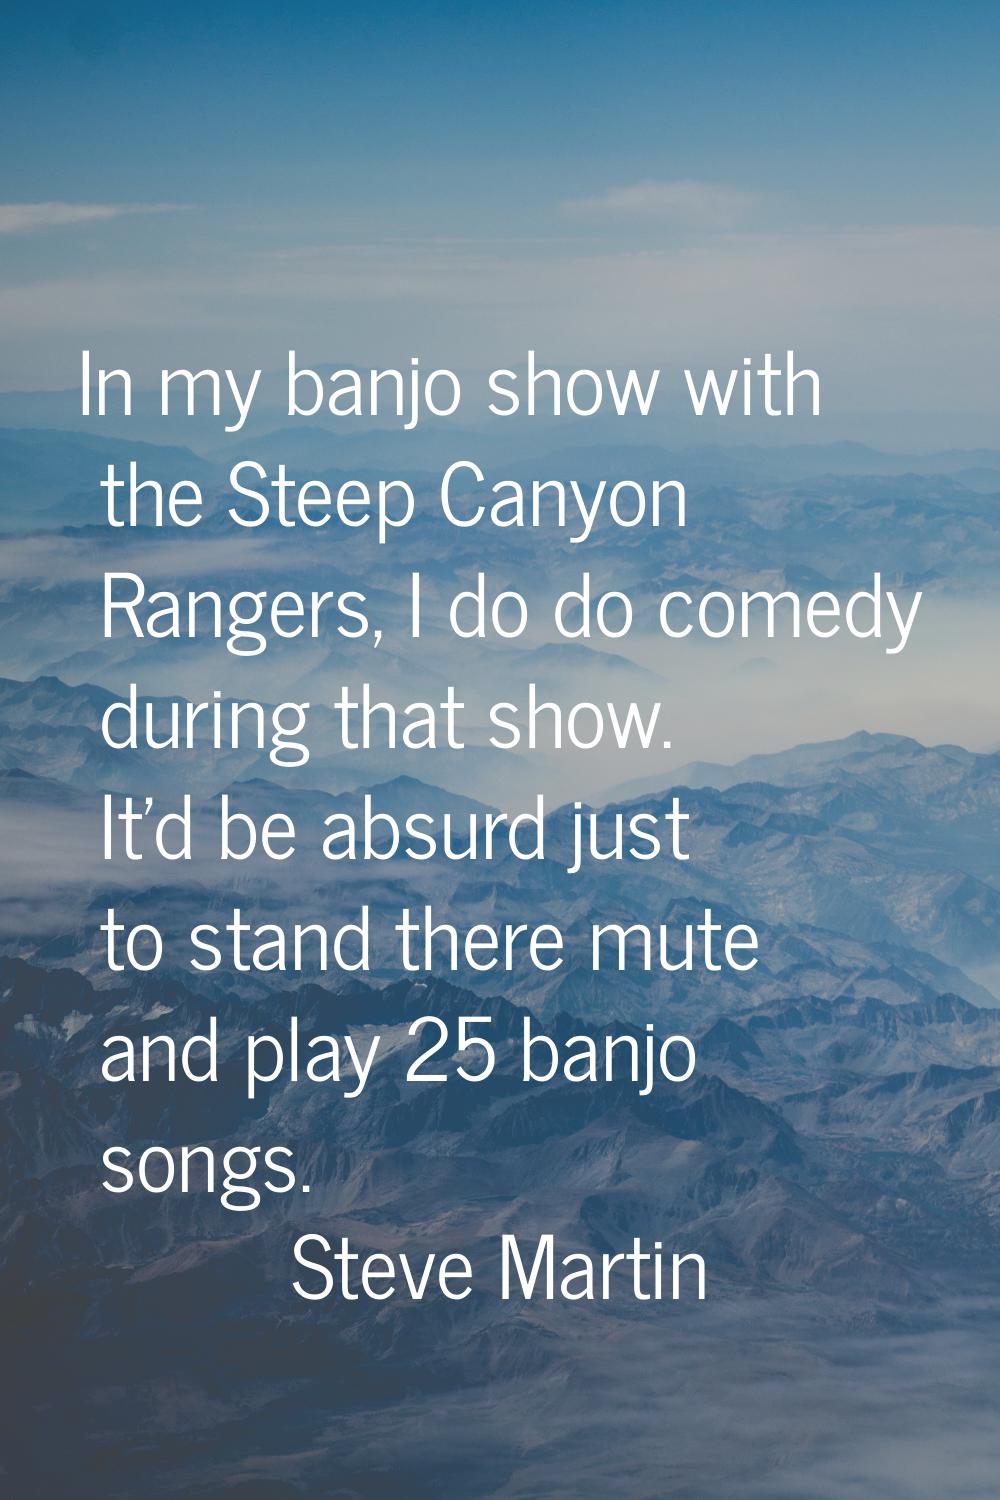 In my banjo show with the Steep Canyon Rangers, I do do comedy during that show. It'd be absurd jus